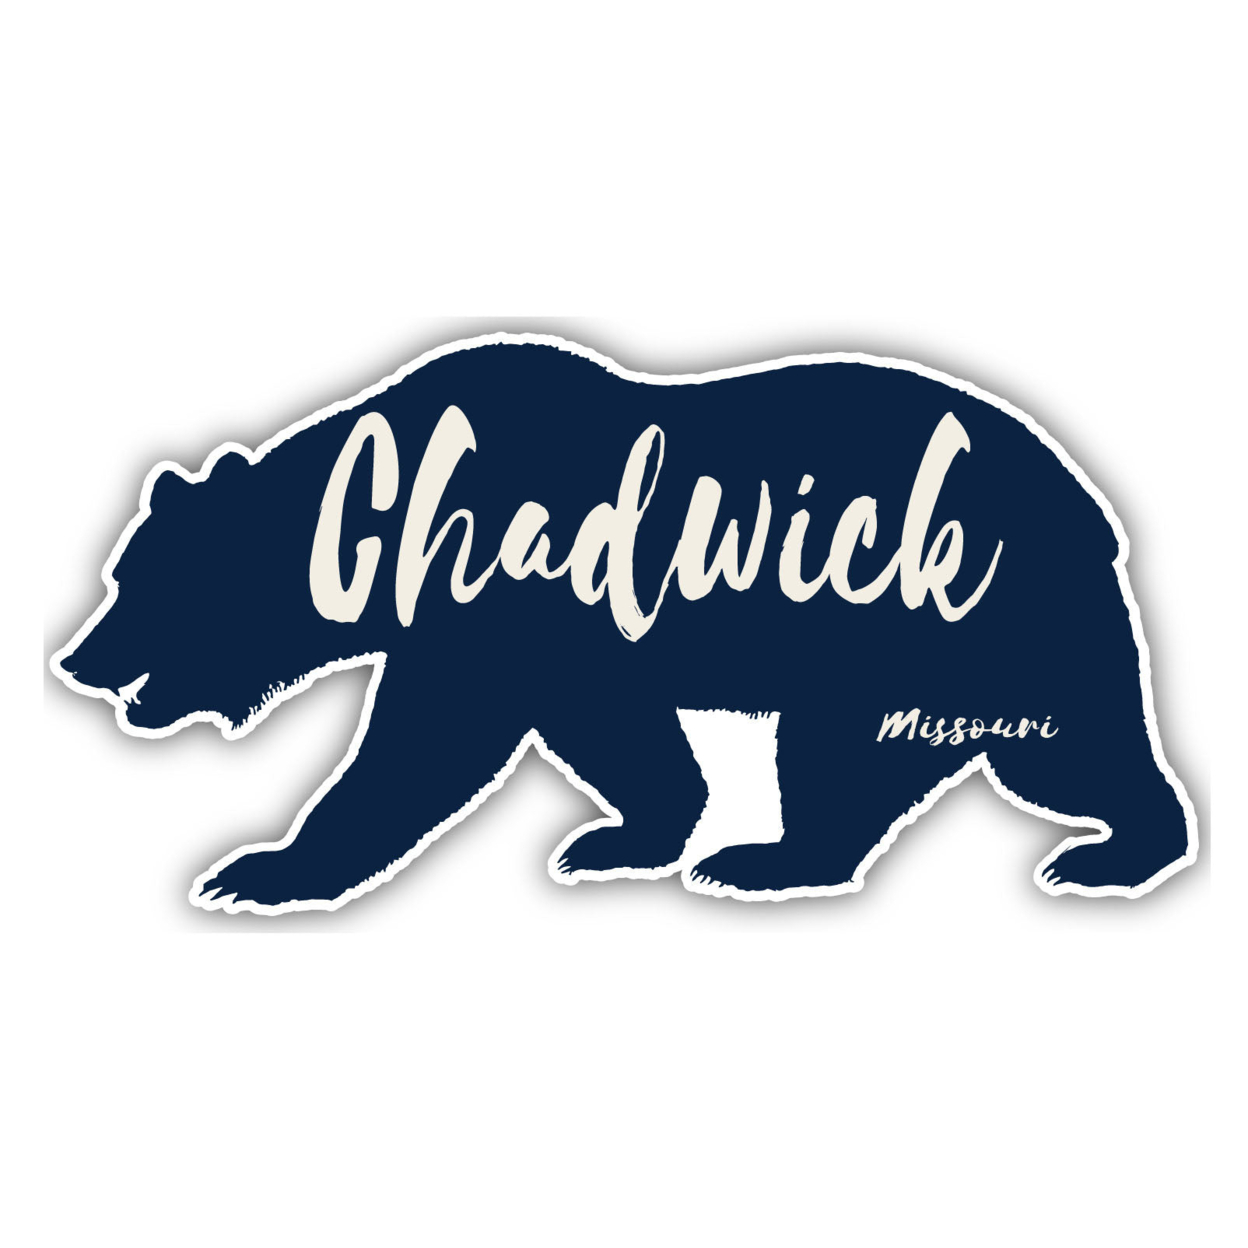 Chadwick Missouri Souvenir Decorative Stickers (Choose Theme And Size) - 4-Pack, 4-Inch, Adventures Awaits